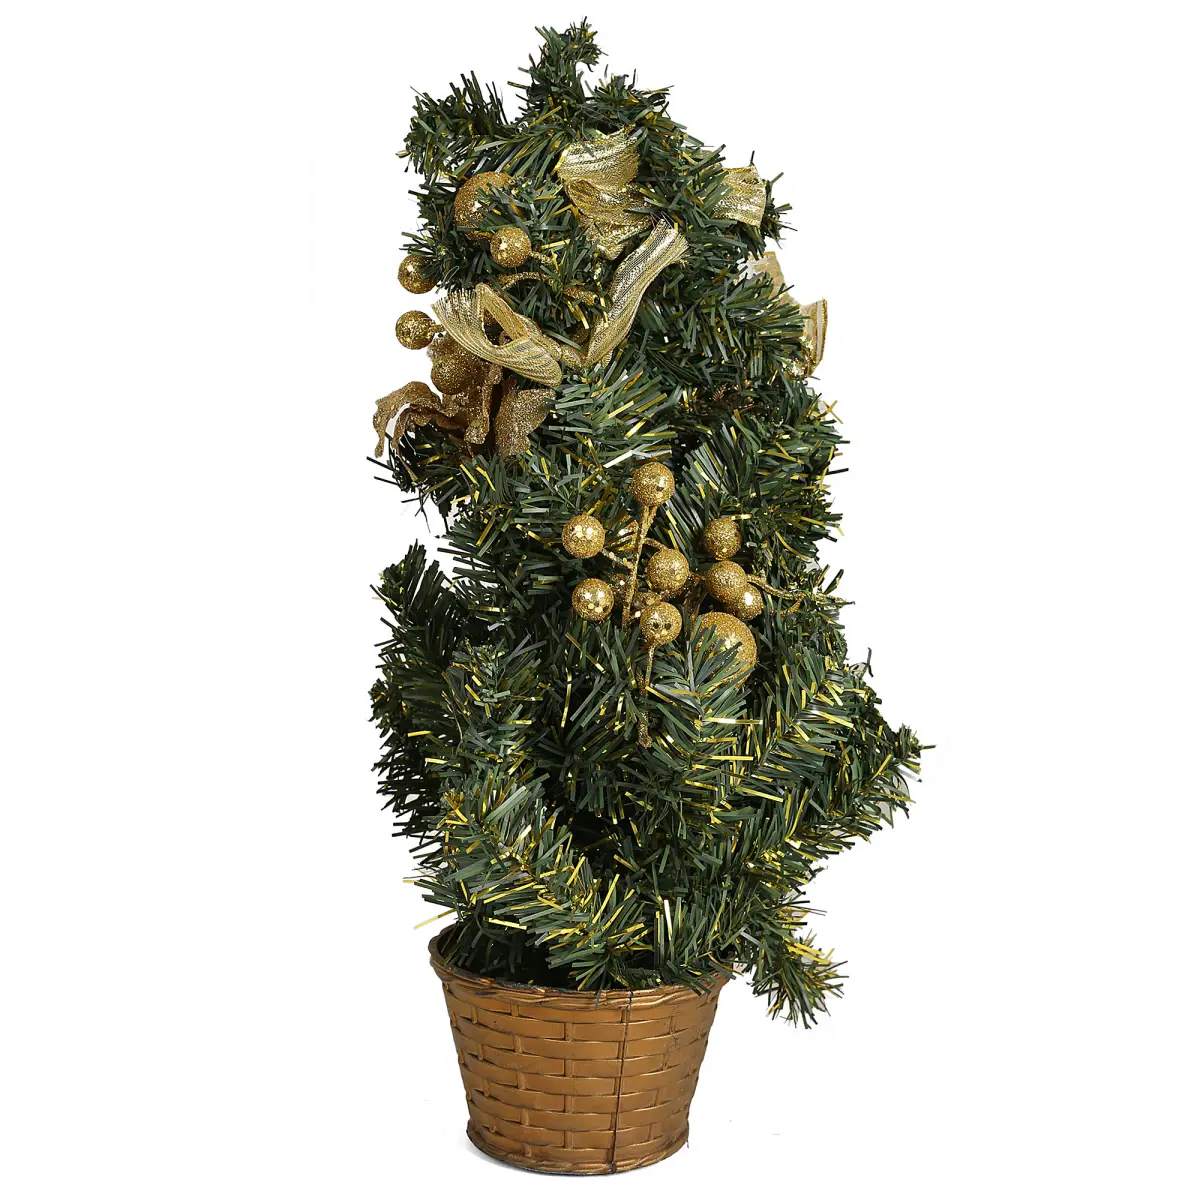 Boing Christmas Tree Decorations, 505cm, Gold